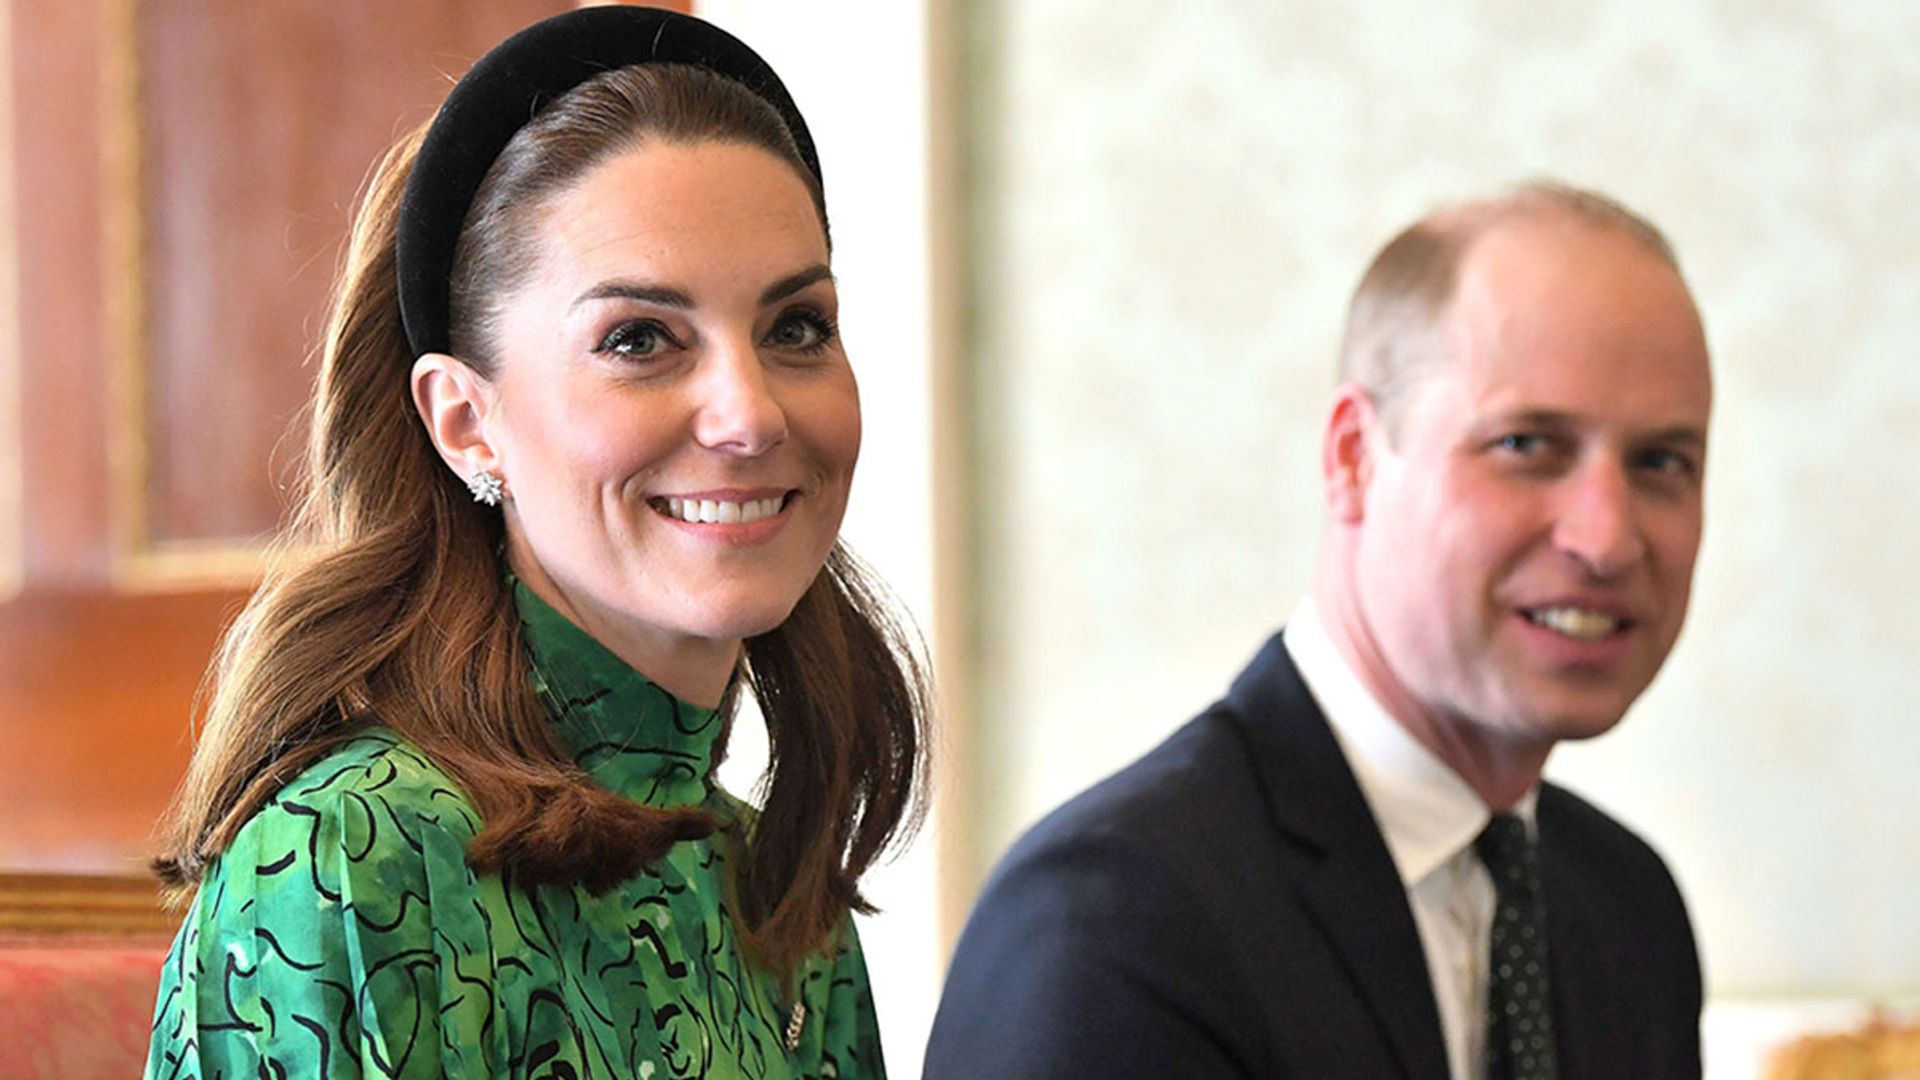 Kate Middleton and Prince William show support for children's mental health amid important week